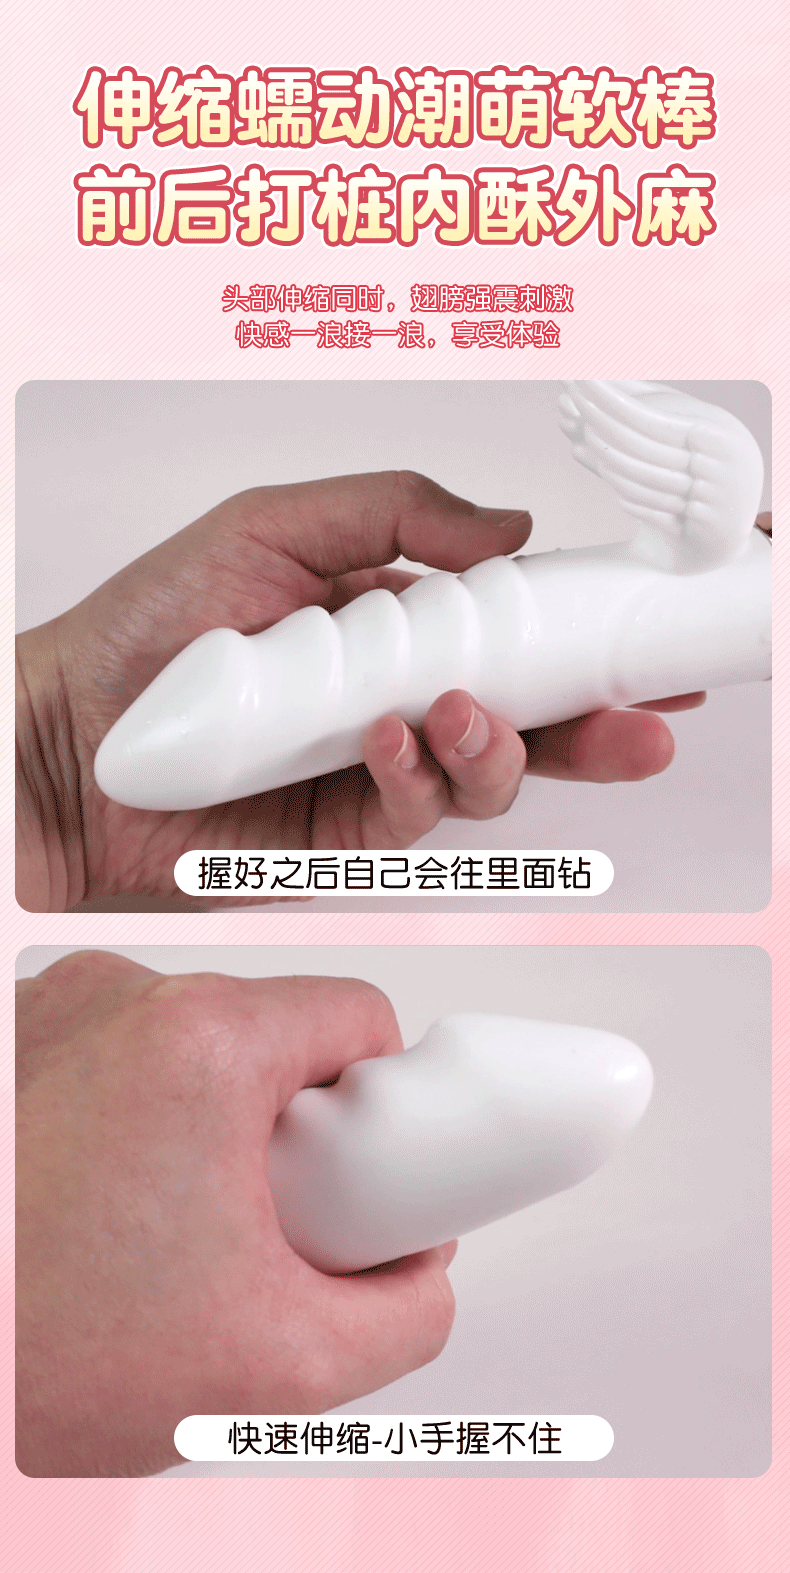 Angel Wings Vaginal Telescopic Clitoral Stimulating Massager